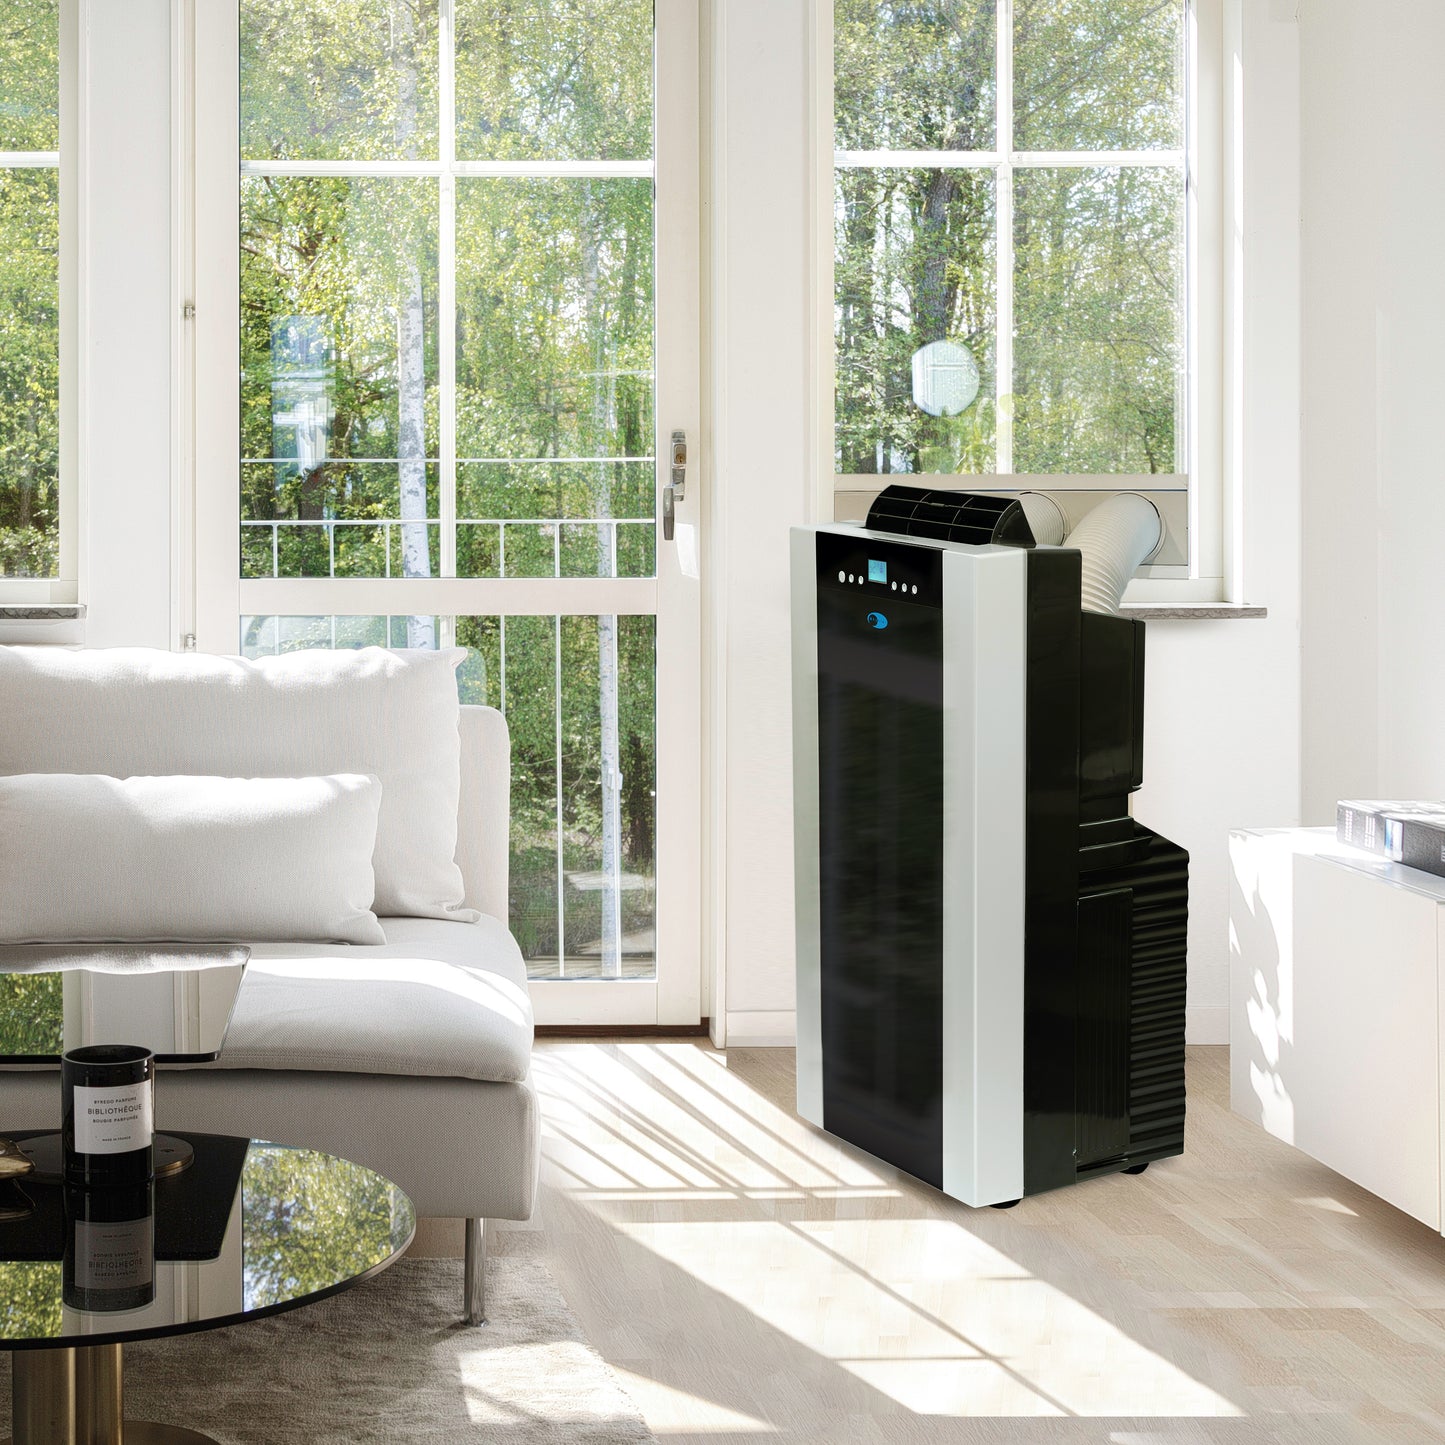 Buy a Whynter 14,000 BTU 500 sq ft Dual Hose Portable Air Conditioner with Activated Carbon Filter by Chilled Beverages